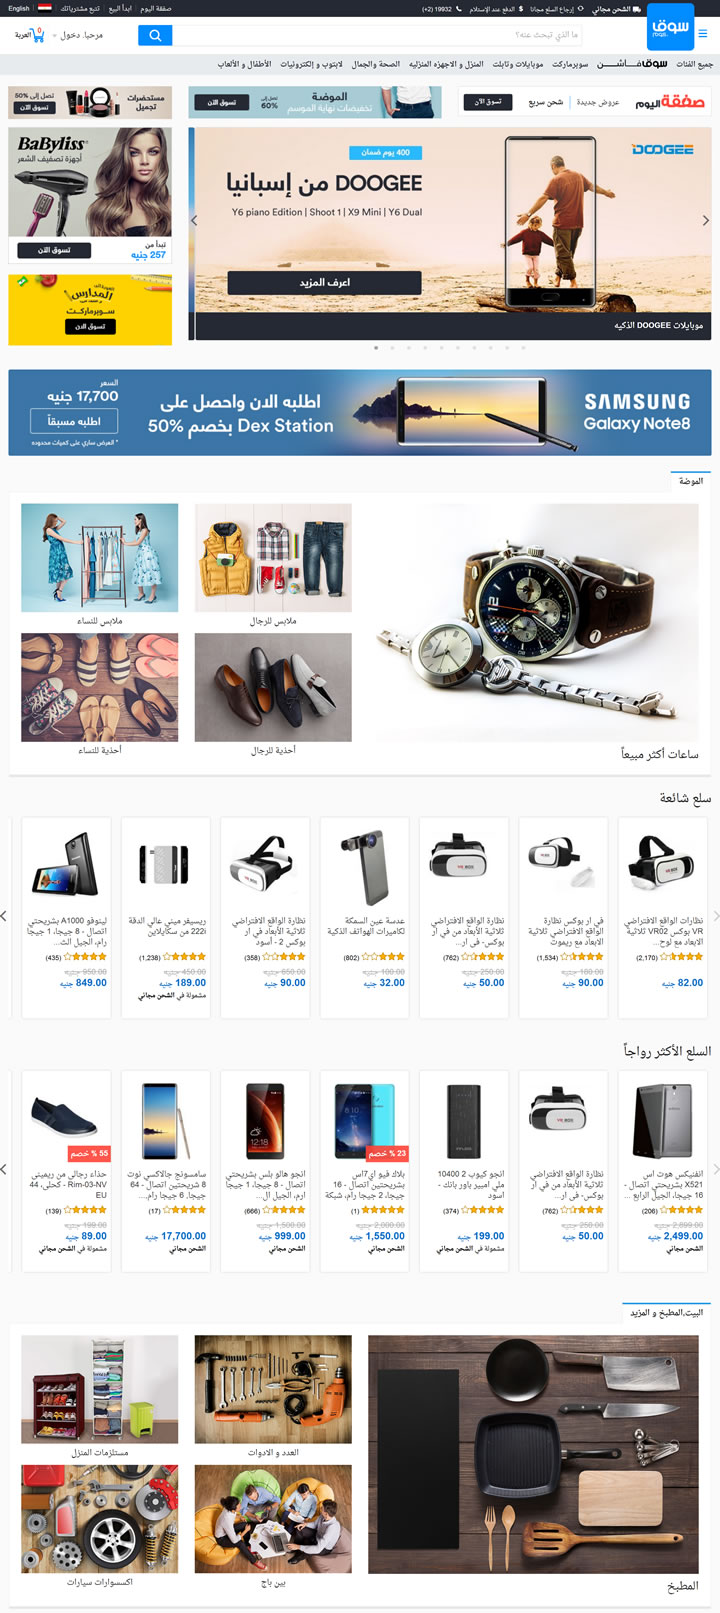 Souq Egypt: The largest E-Commerce Site in the Arab World